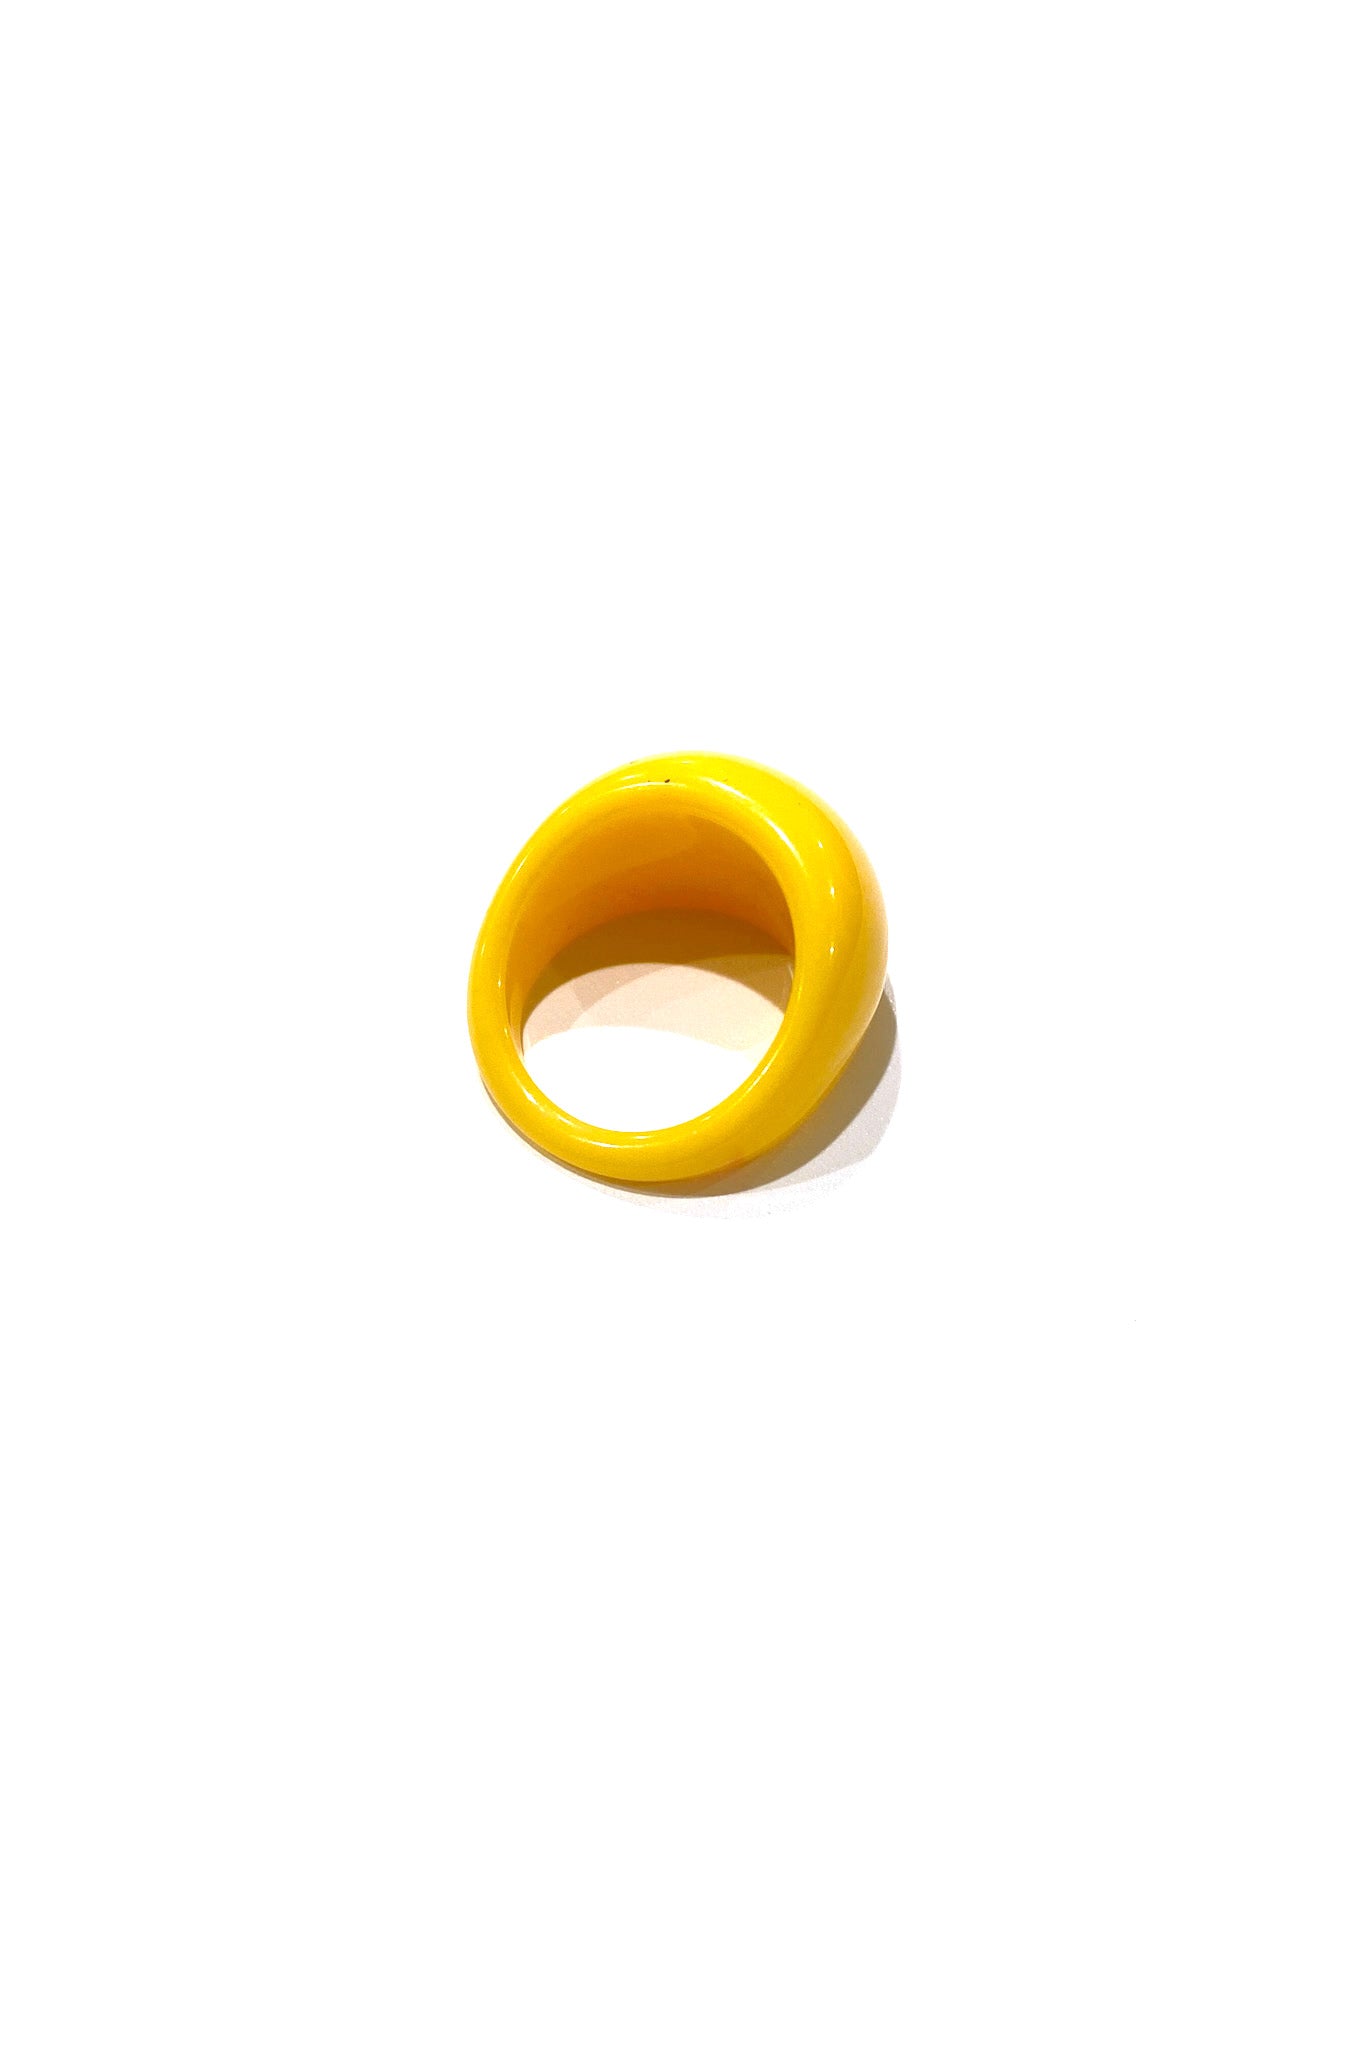 Vintage yellow ring Shining in the sunlight